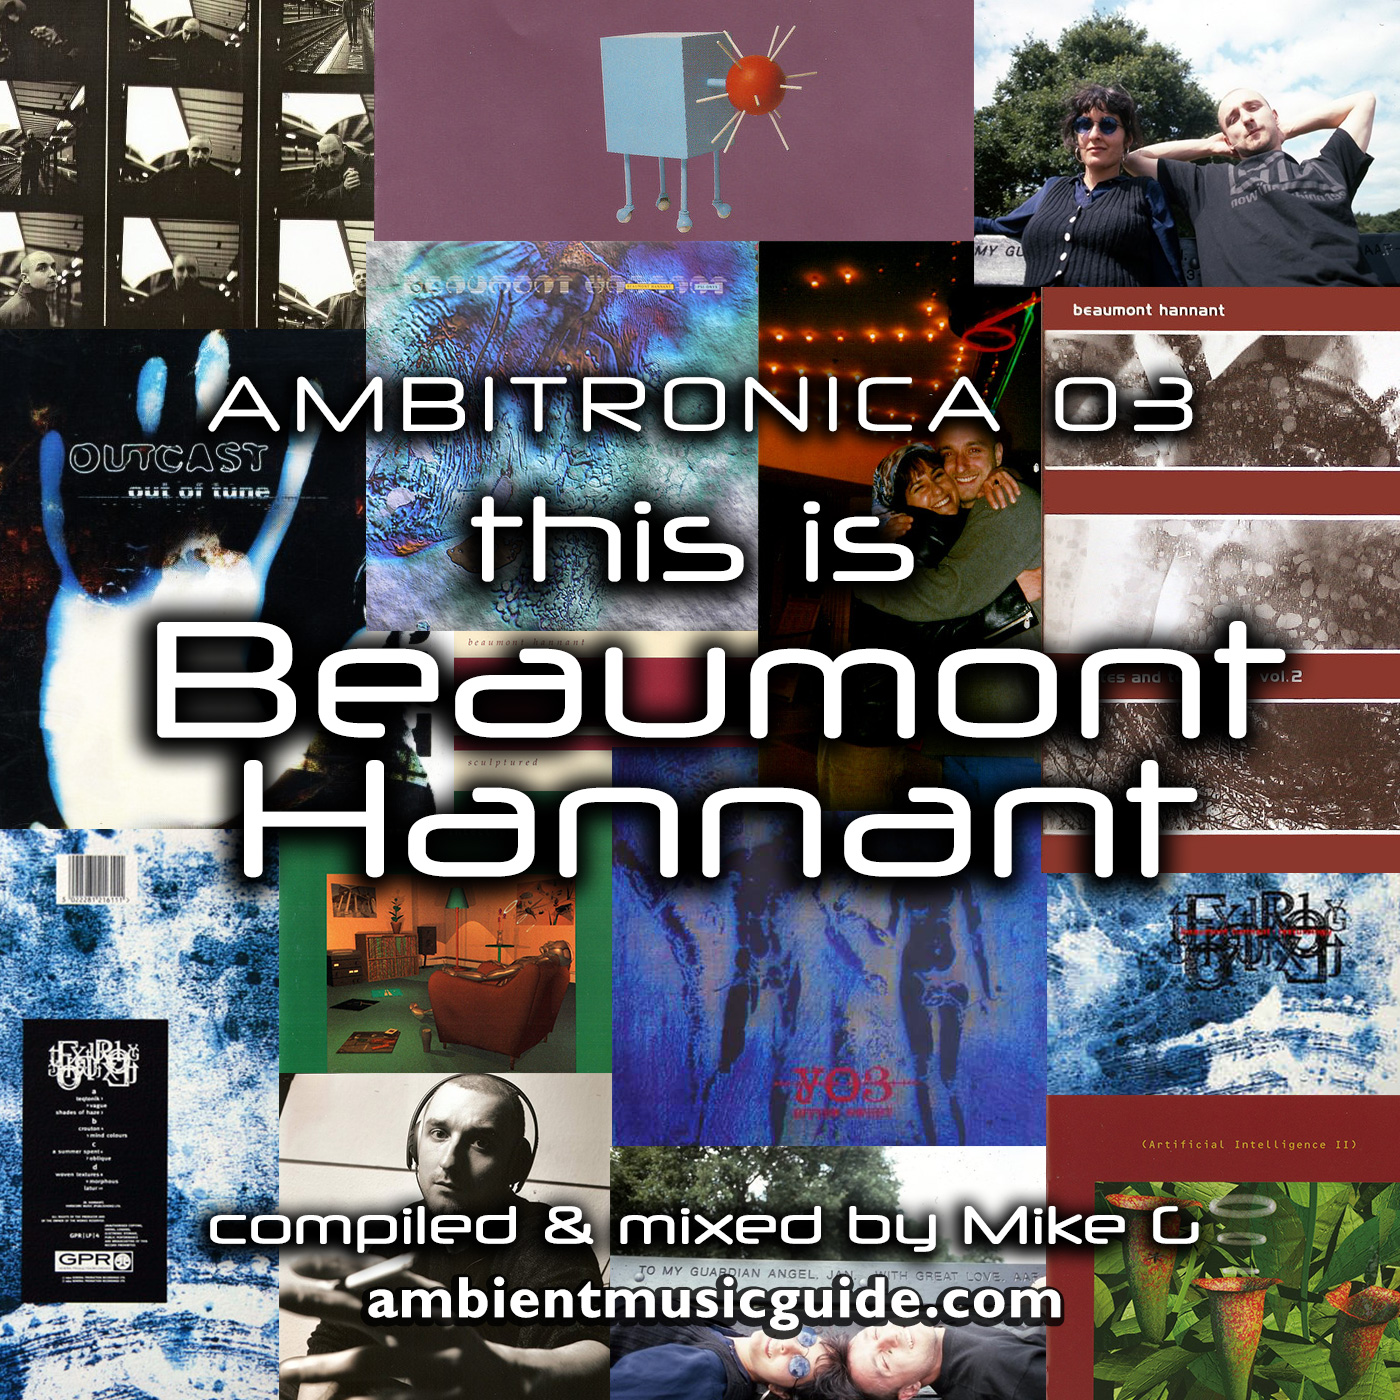 Ambitronica 03 - This Is Beaumont Hannant compiled & mixed by Mike G